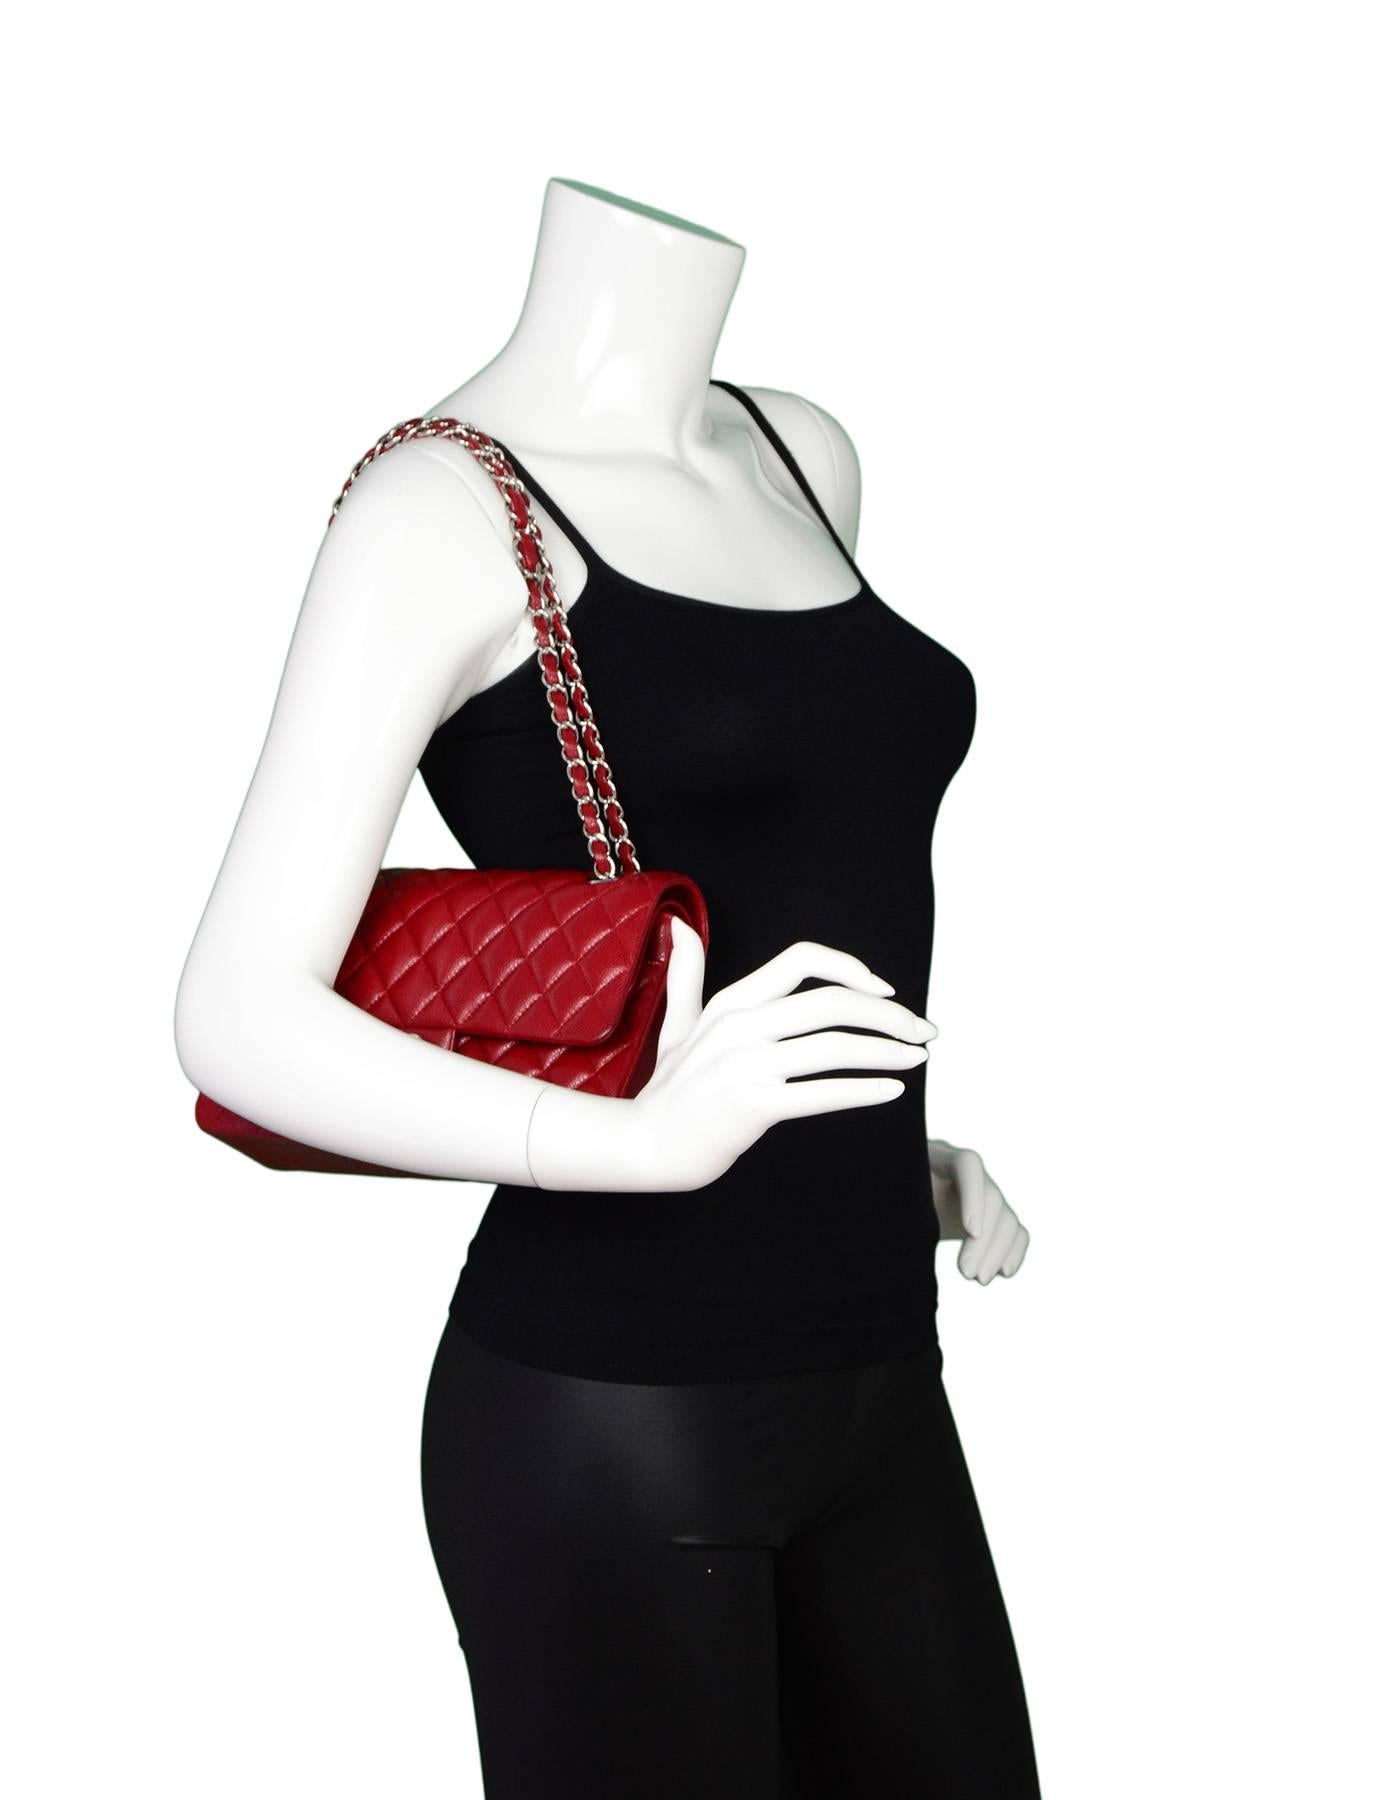 Chanel Red Quilted Caviar Classic Medium Double Flap Bag

Made In: France
Year of Production: 2012
Color: Red
Hardware: Silvertone
Materials: Caviar leather
Lining: Red leather
Closure/opening: Double flap top with snap and CC twist lock
Exterior